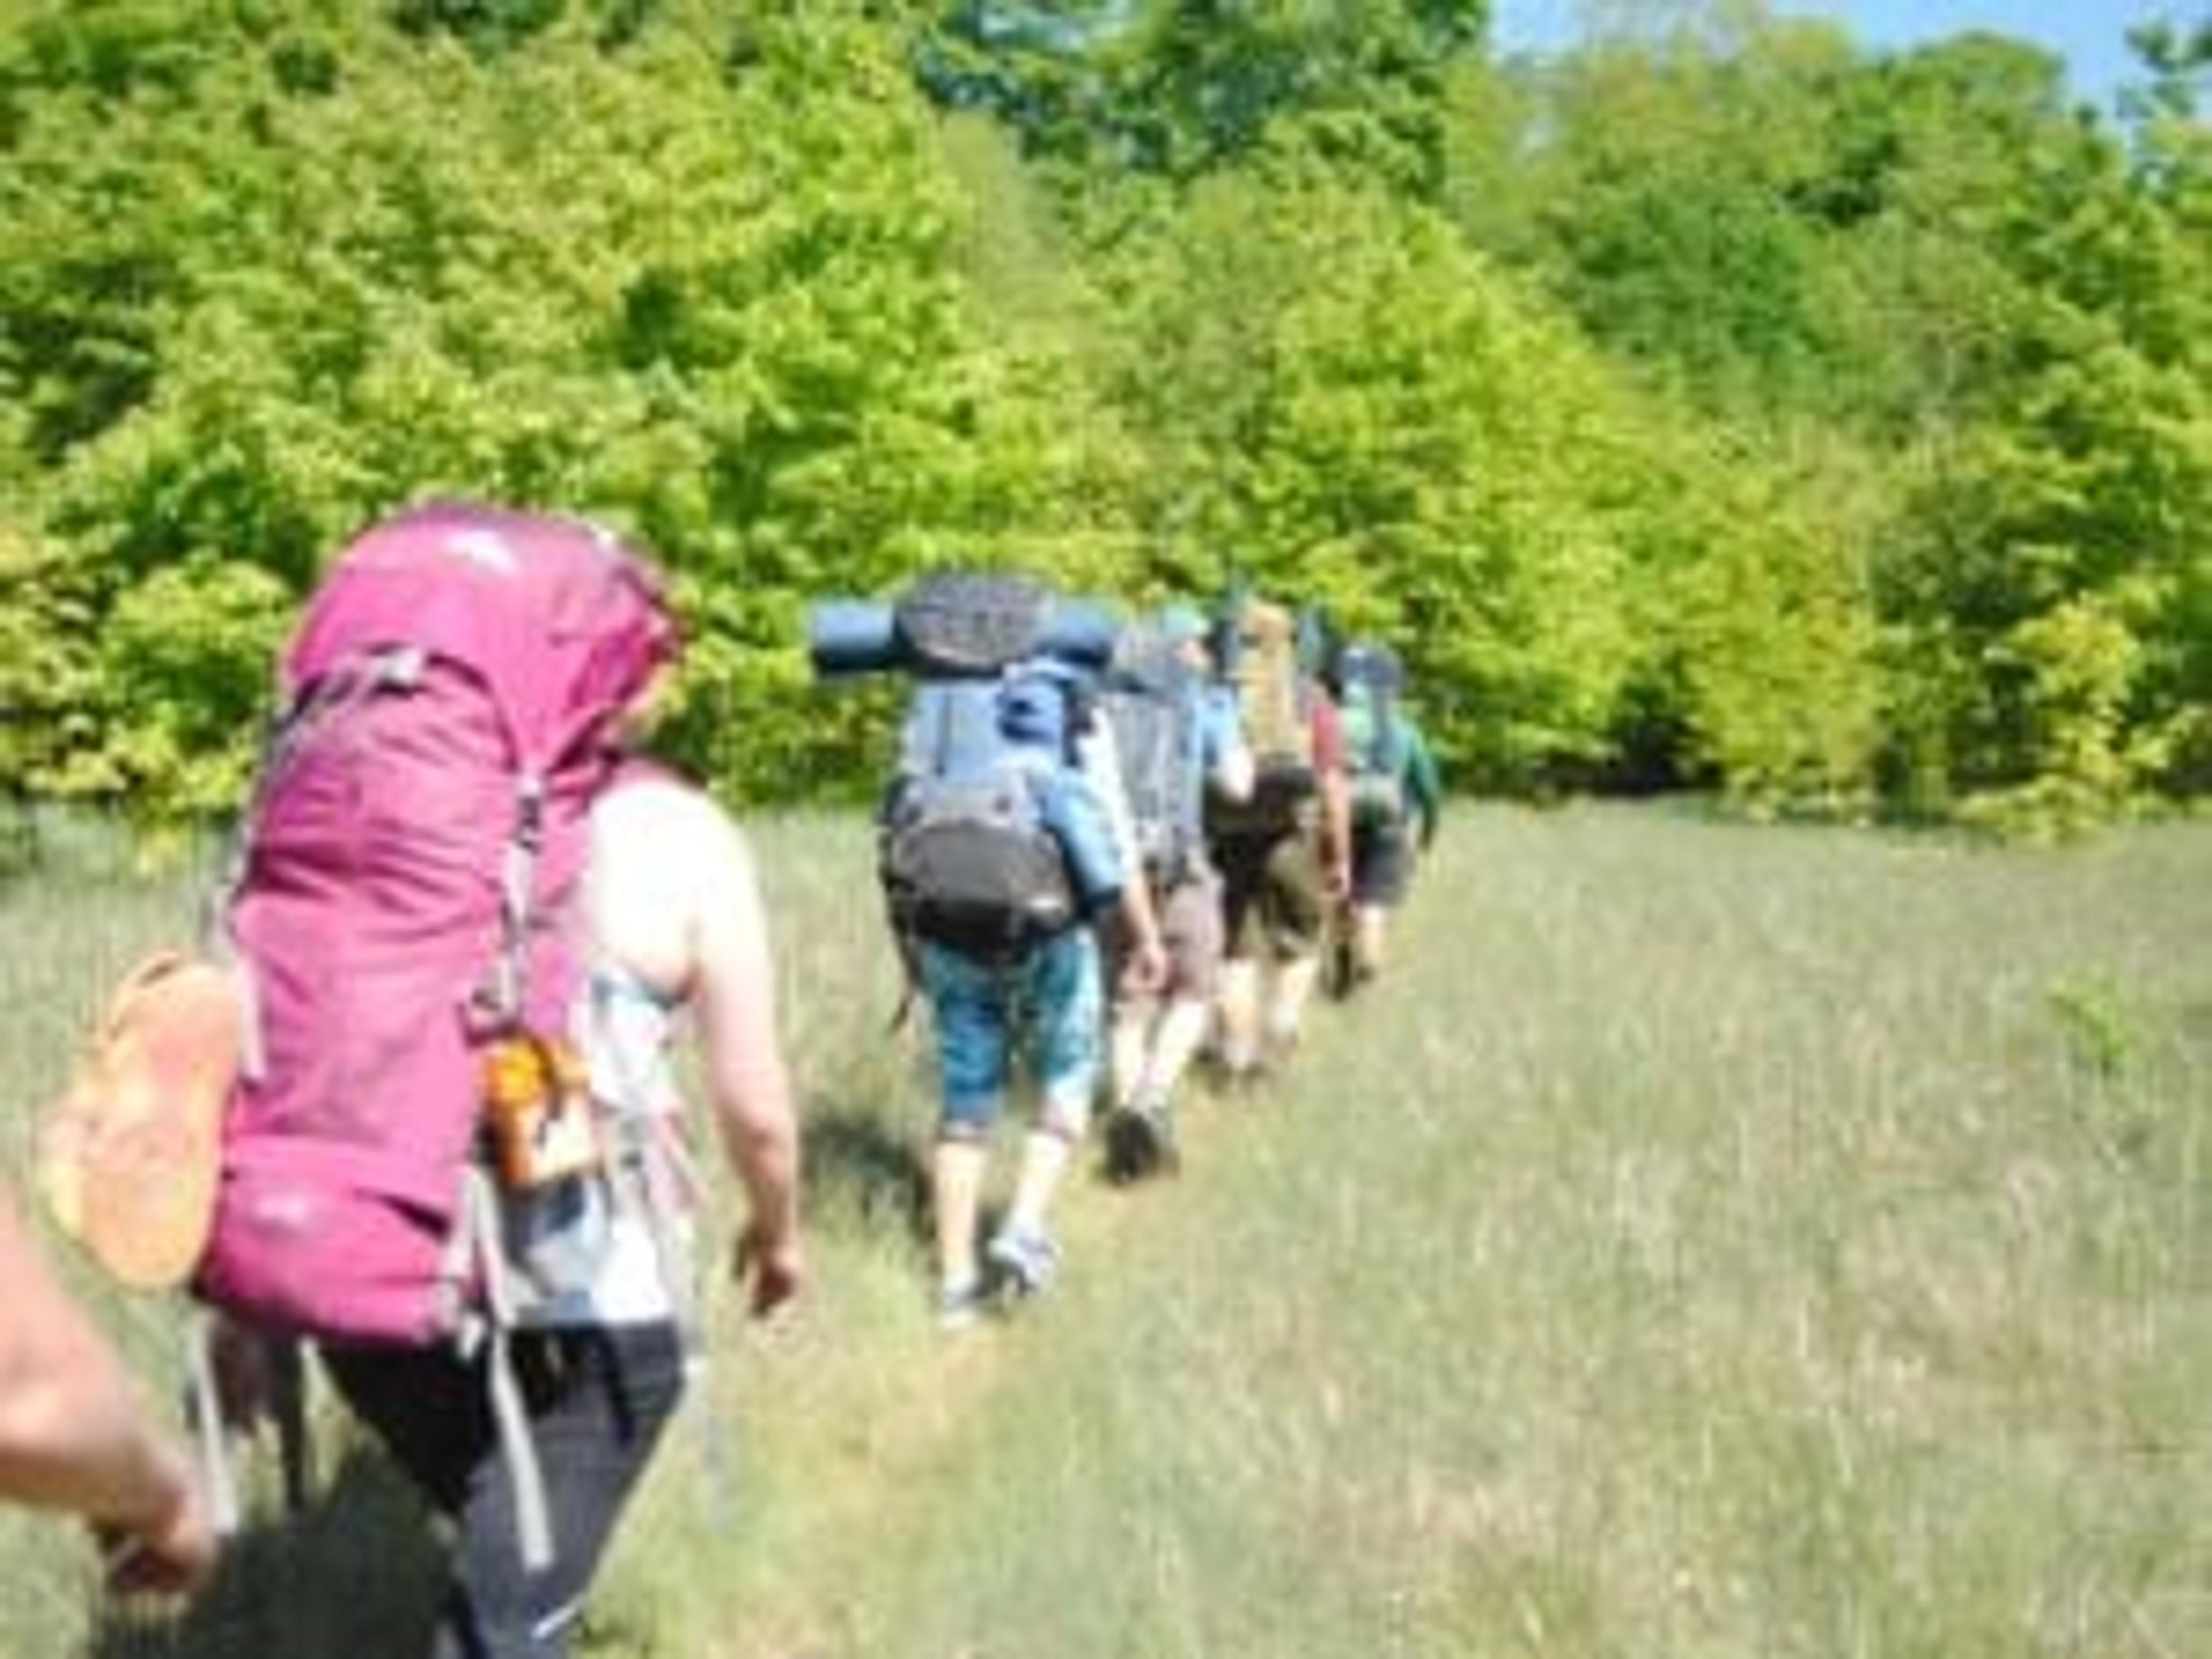 the group with backpacks walking in a field